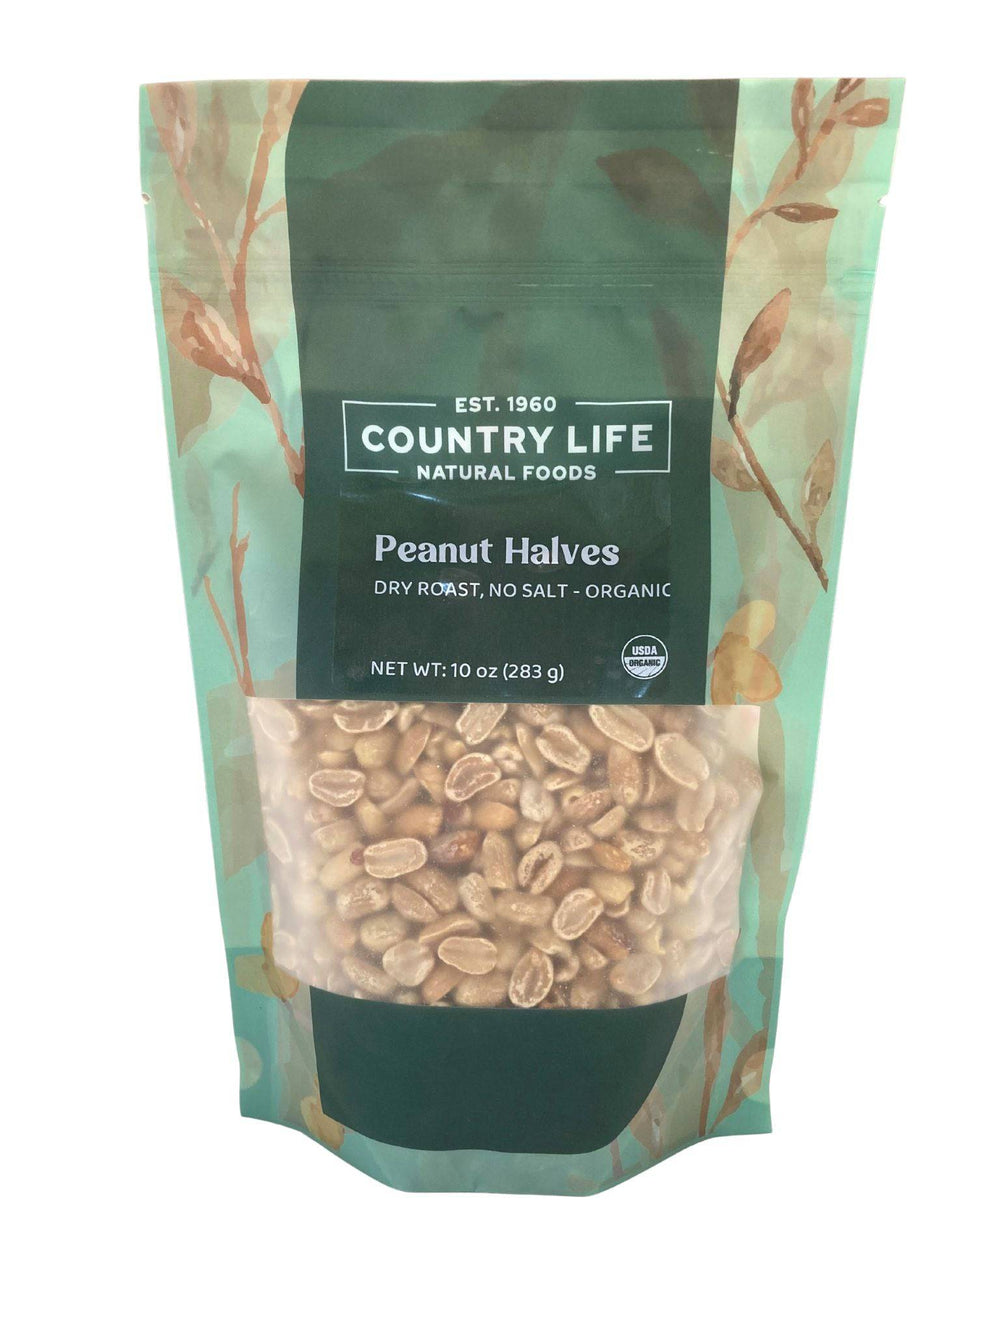 Organic Peanuts, 1/2s Dry Roasted, No Salt - Country Life Natural Foods